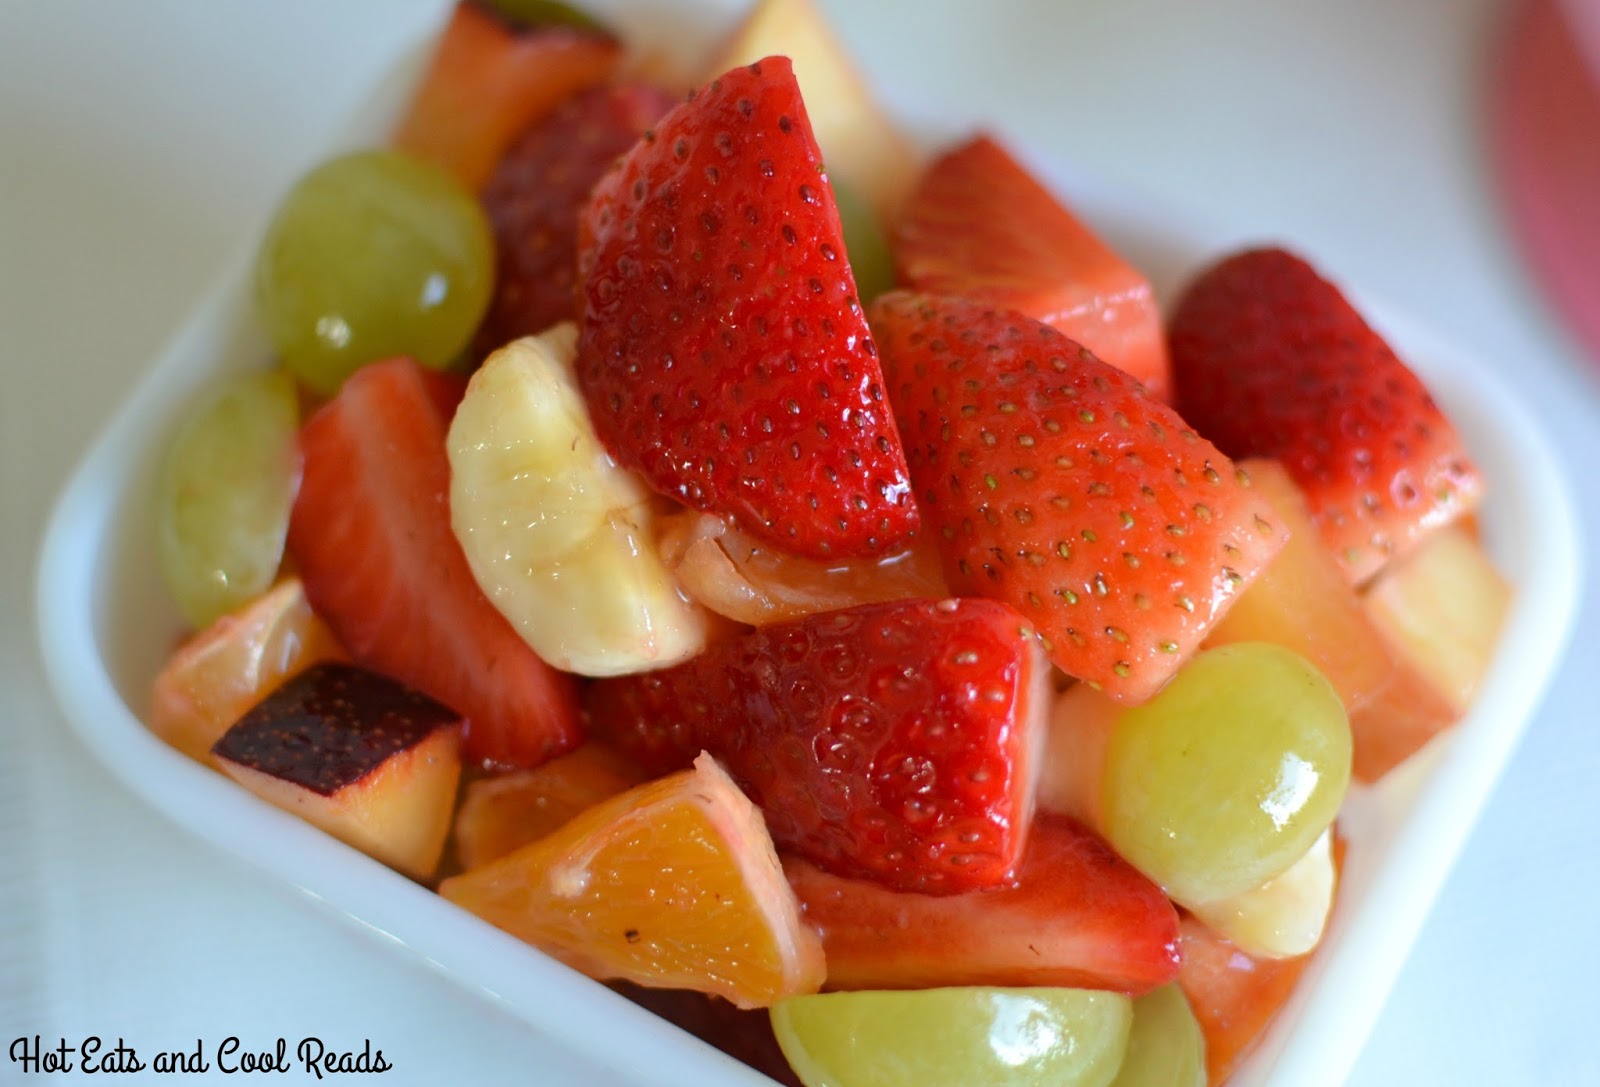 Hot Eats and Cool Reads: Best Ever Breakfast or Brunch Strawberry Fruit